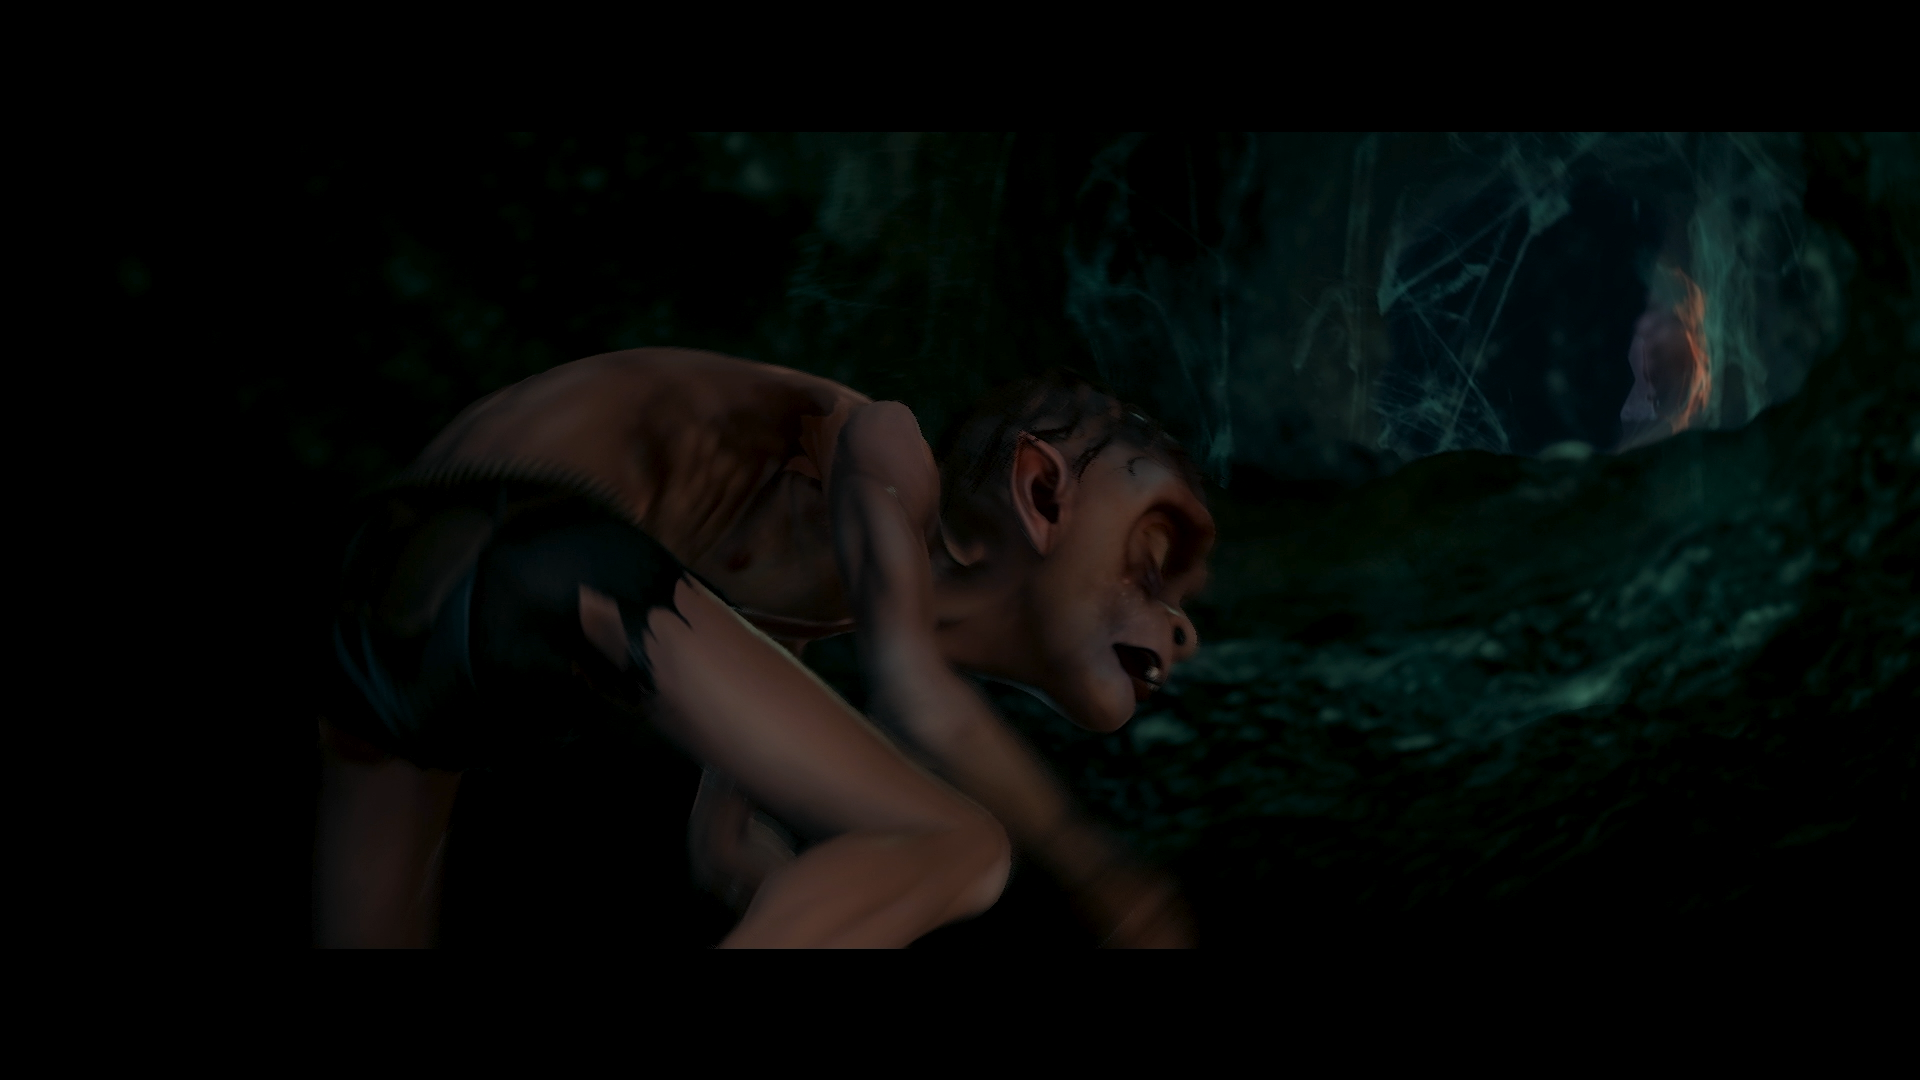 The Lord of the Rings: Gollum Gameplay Revealed 